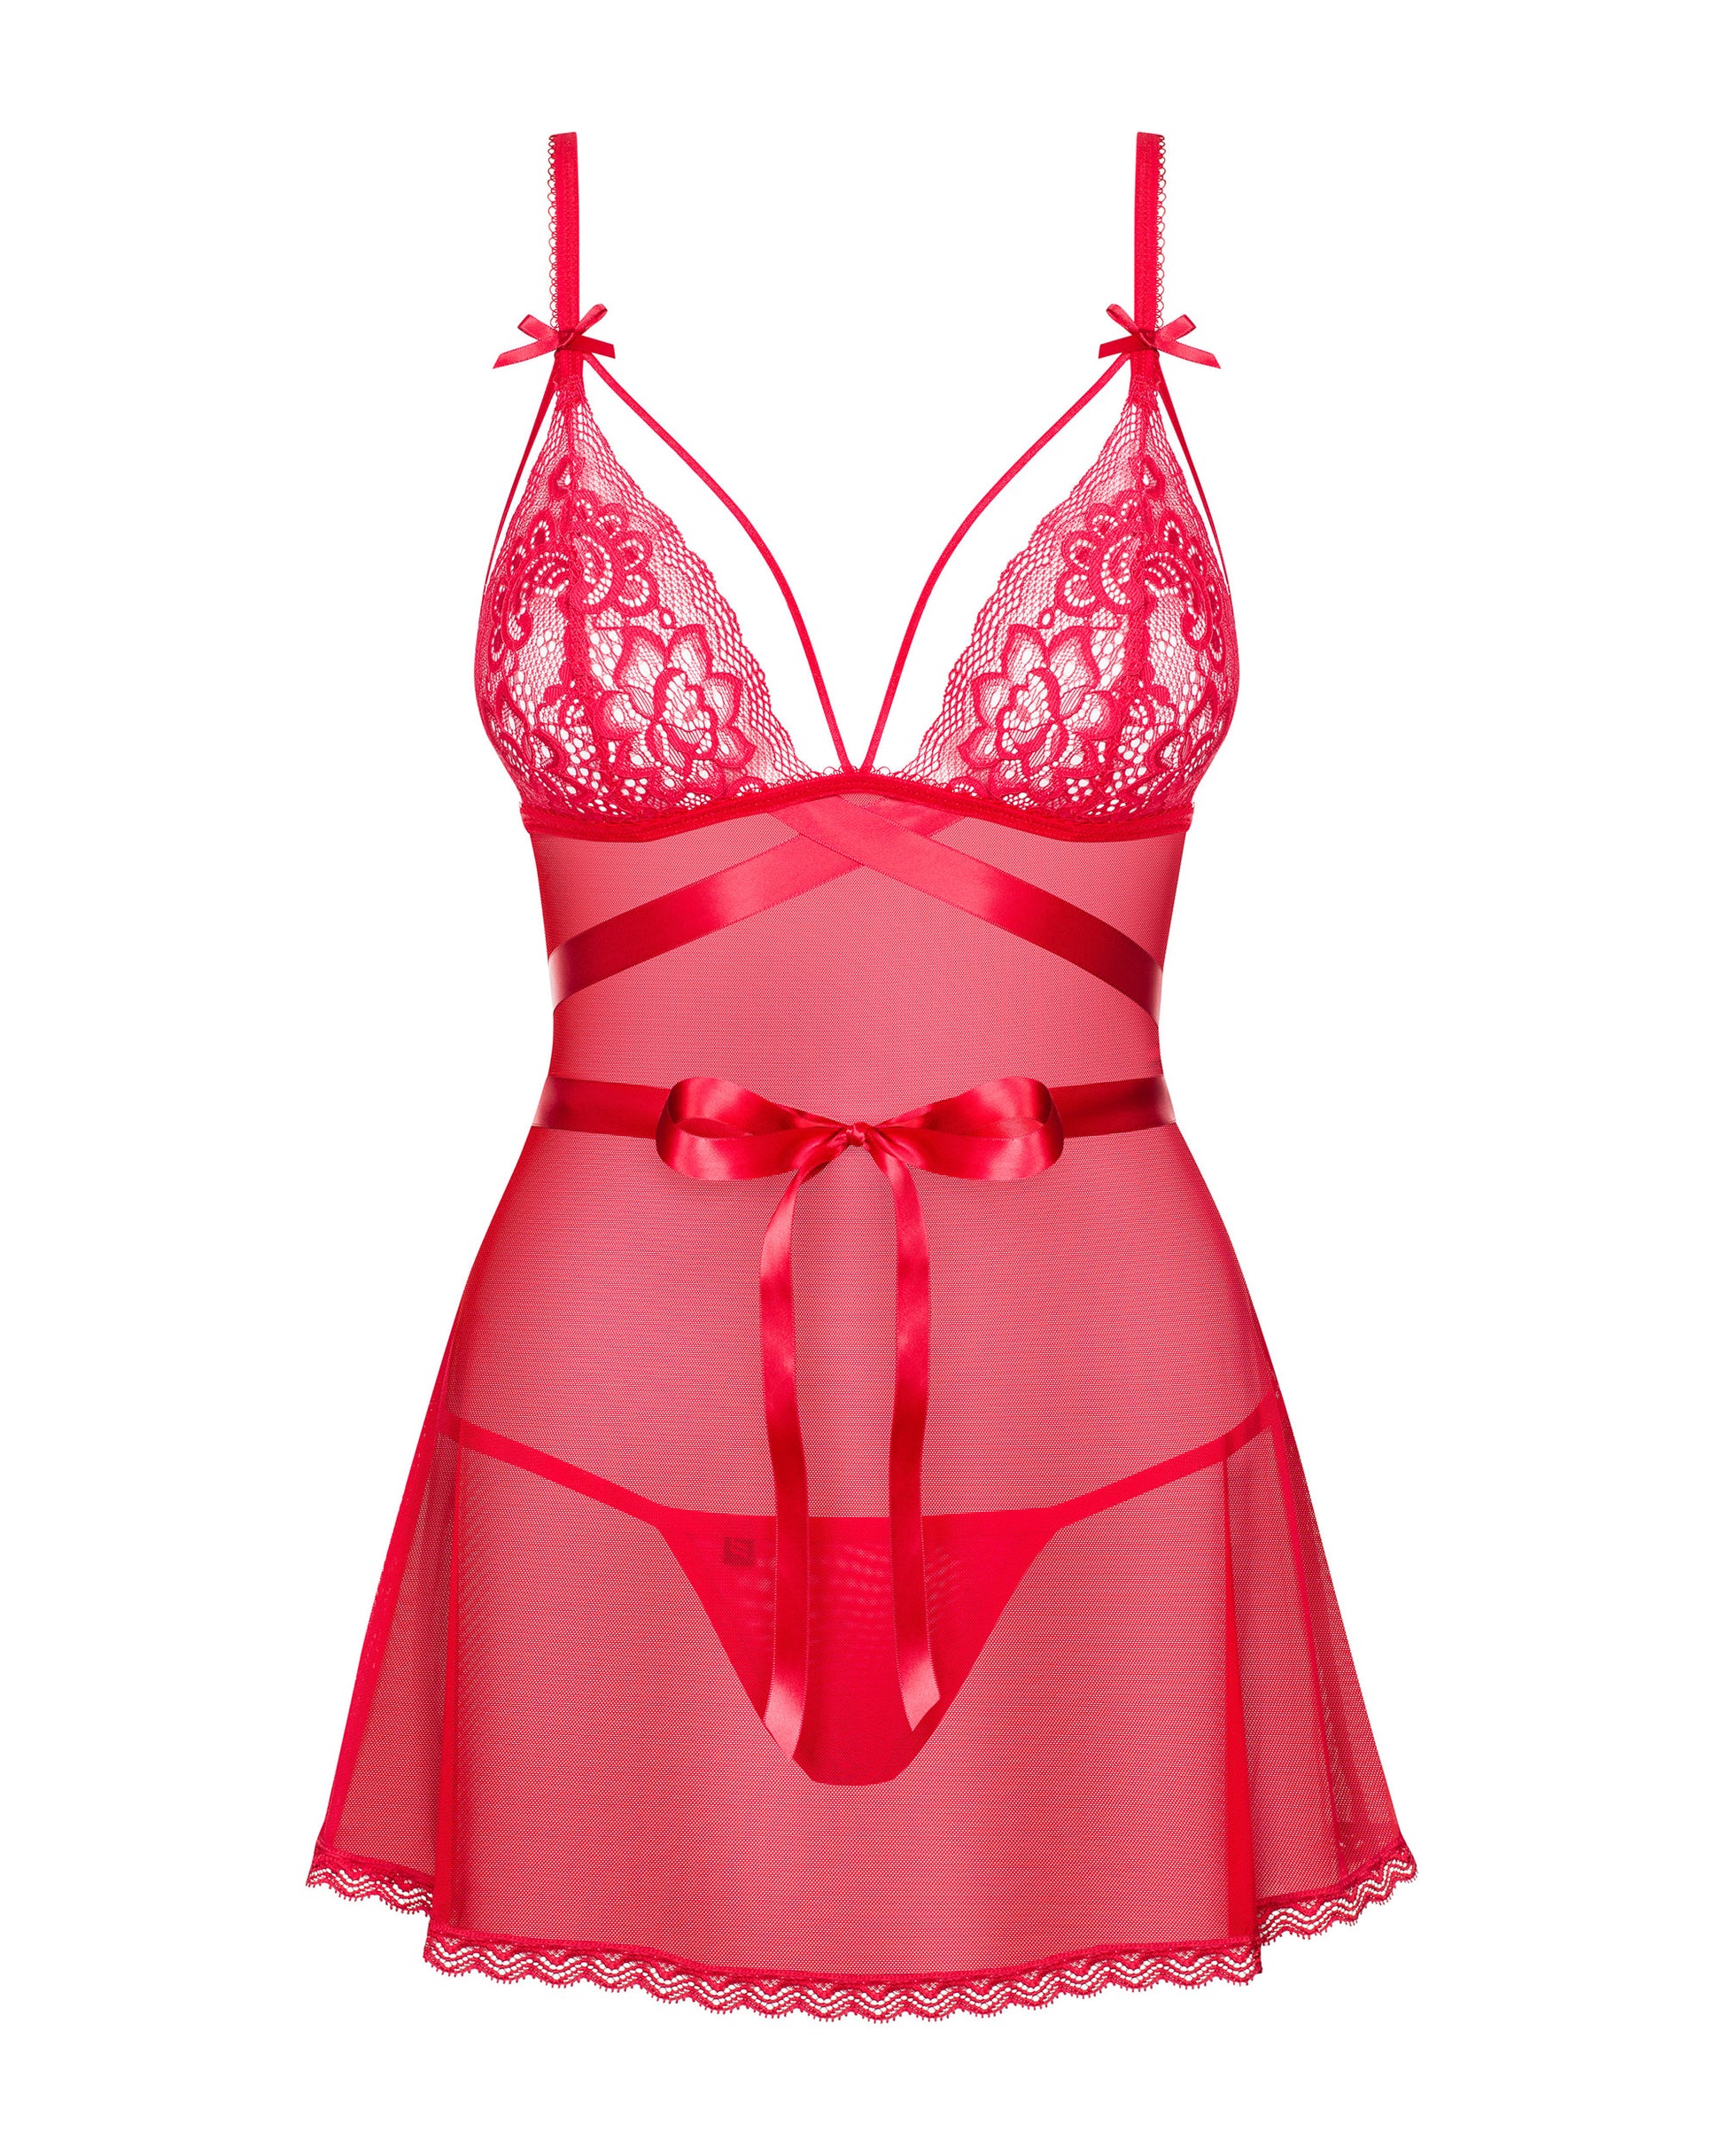 Obsessive | Lovlea Babydoll Red Look elegant and seductive in the Lovlea Babydoll Red. This striking red piece of lingerie is all you need for a special night. Crafted from delicate fabric, it features a deep neckline and is sure to set your partner's heart racing. Add a touch of glamour without too much effort.